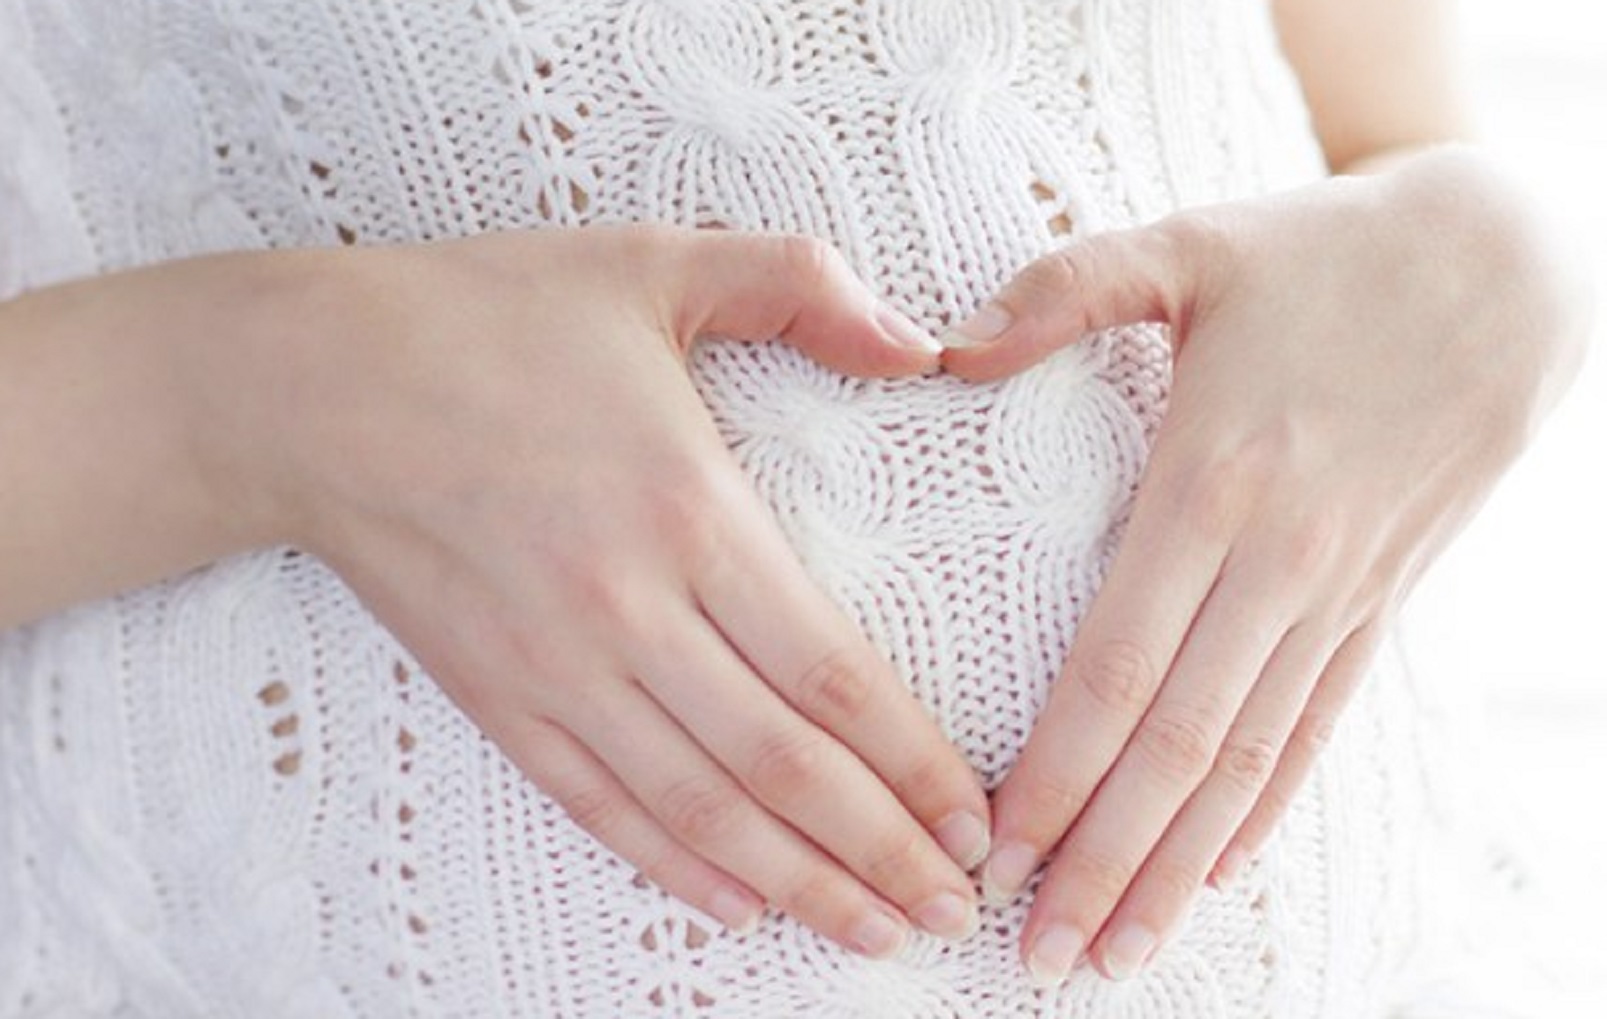 Gestational Surrogacy Requirements: What They Are and Why They’re Important